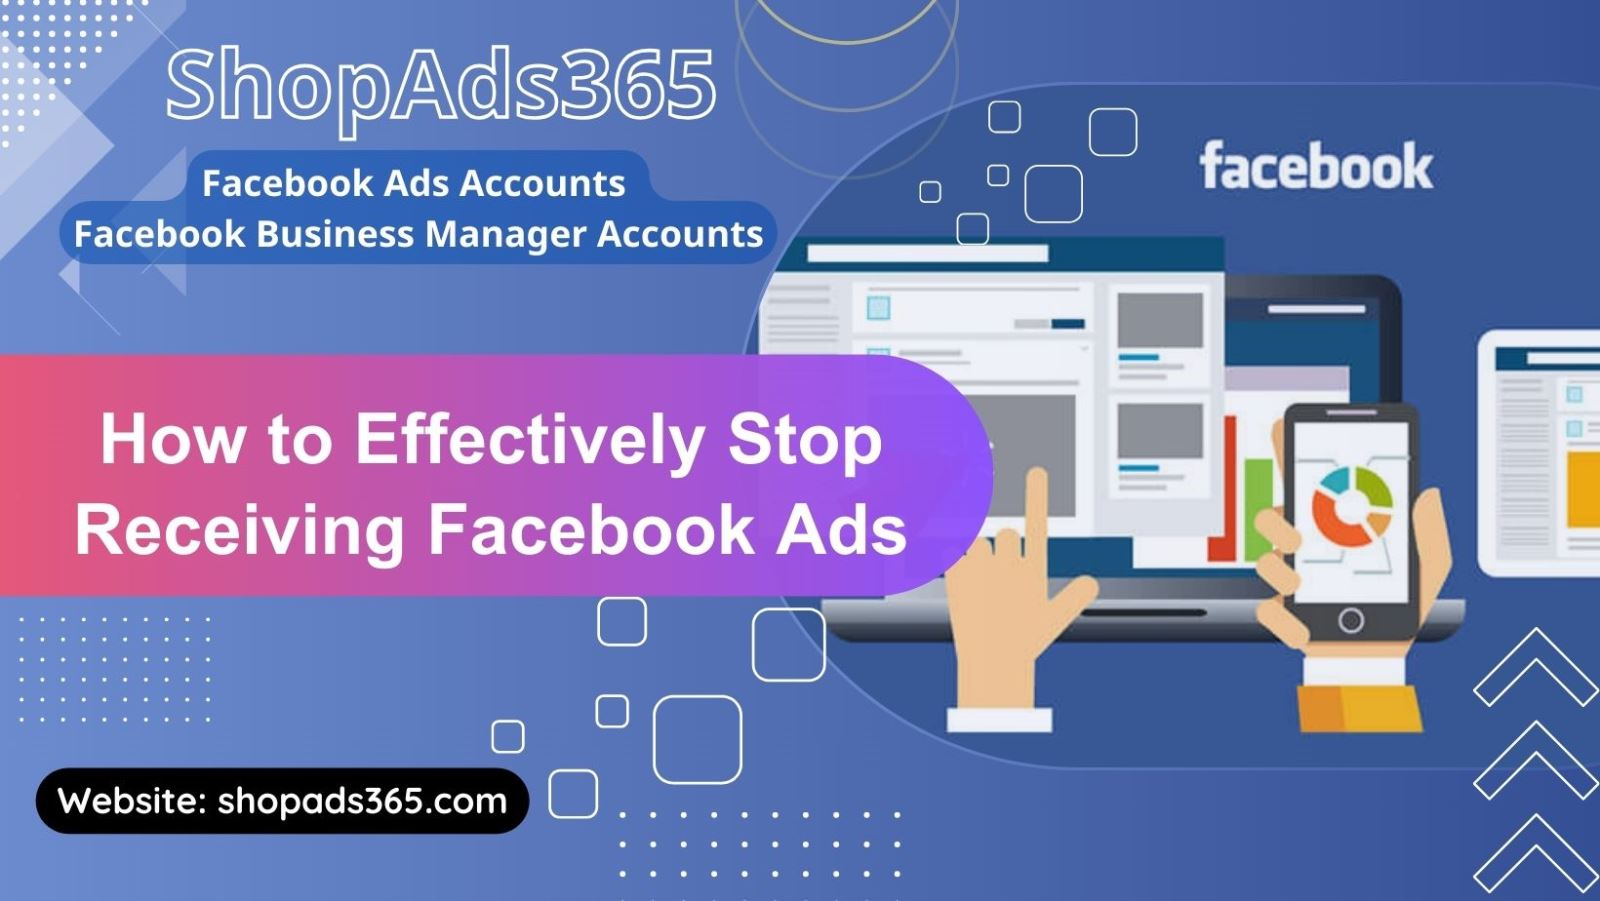 How to Stop Getting Facebook Ads